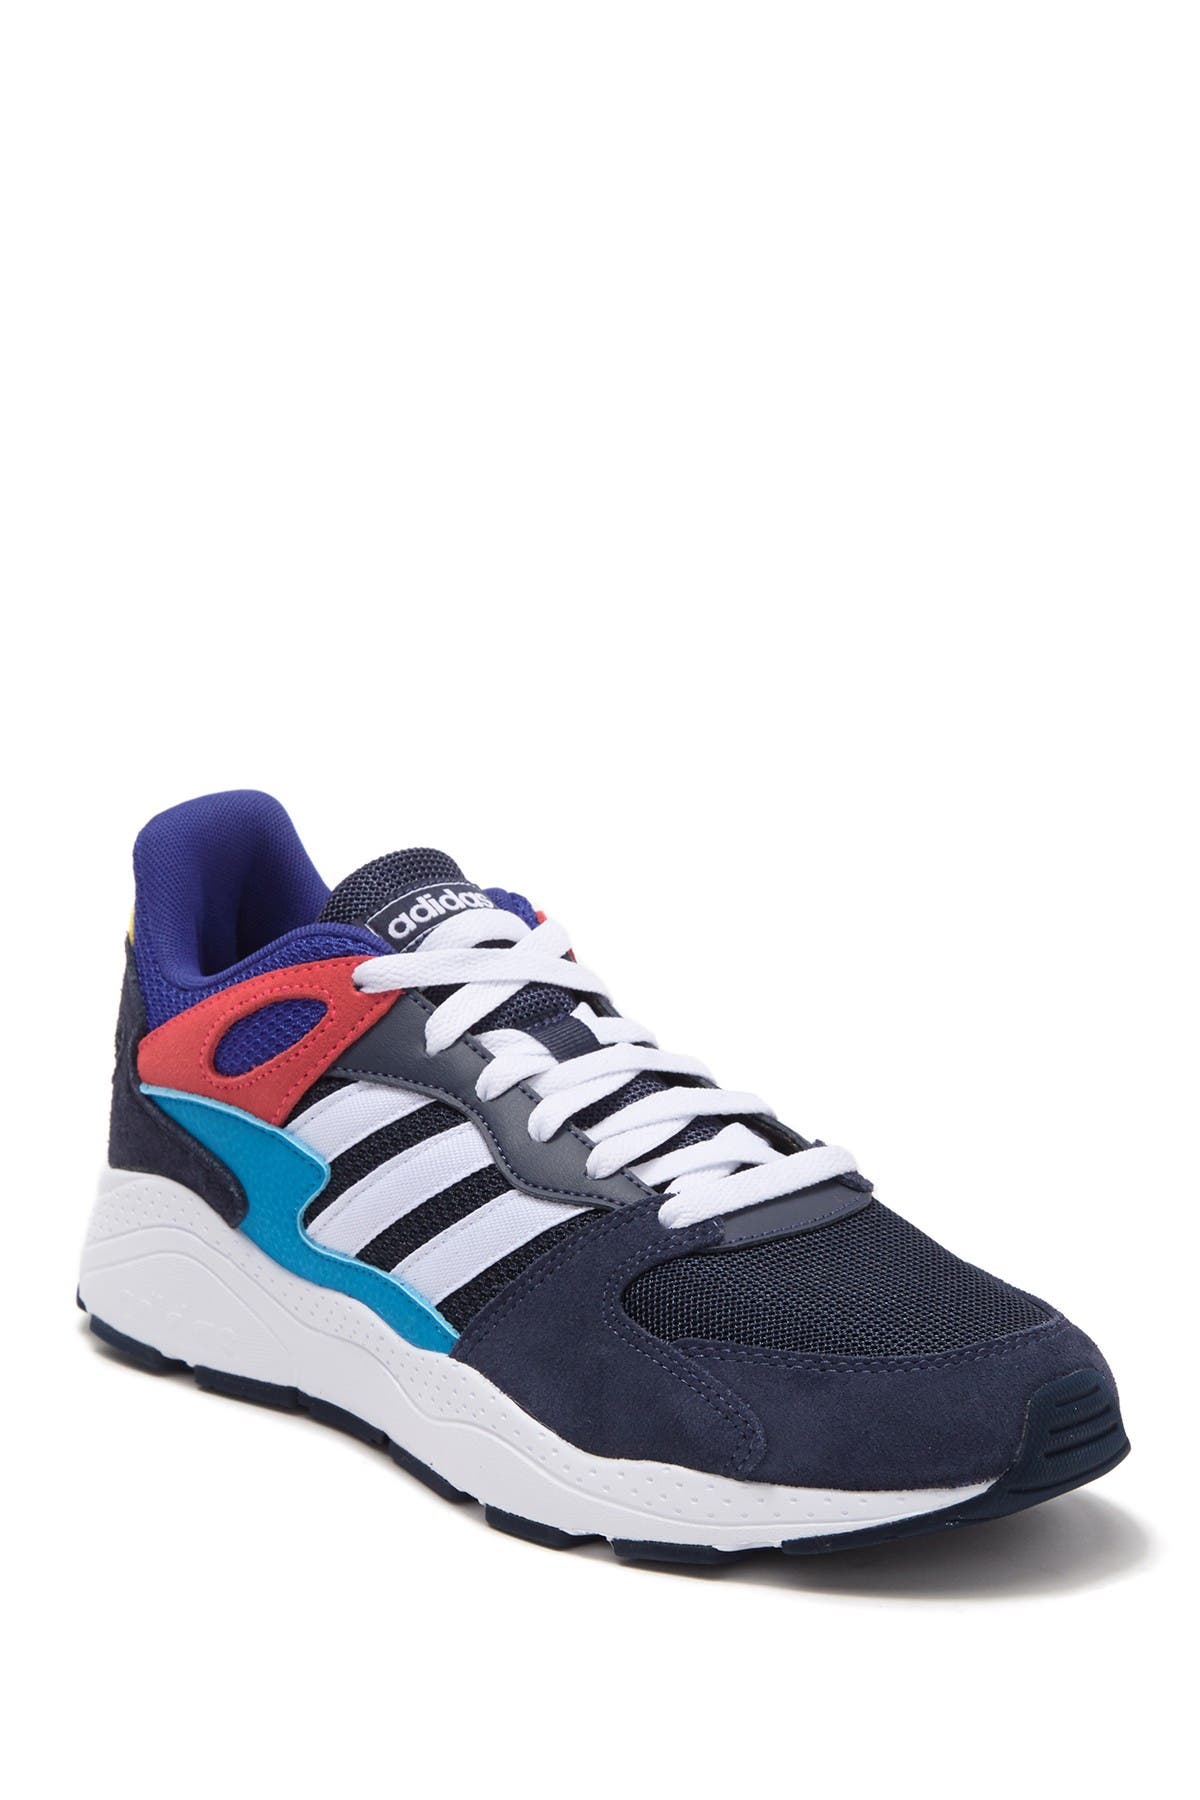 adidas chaos sneakers